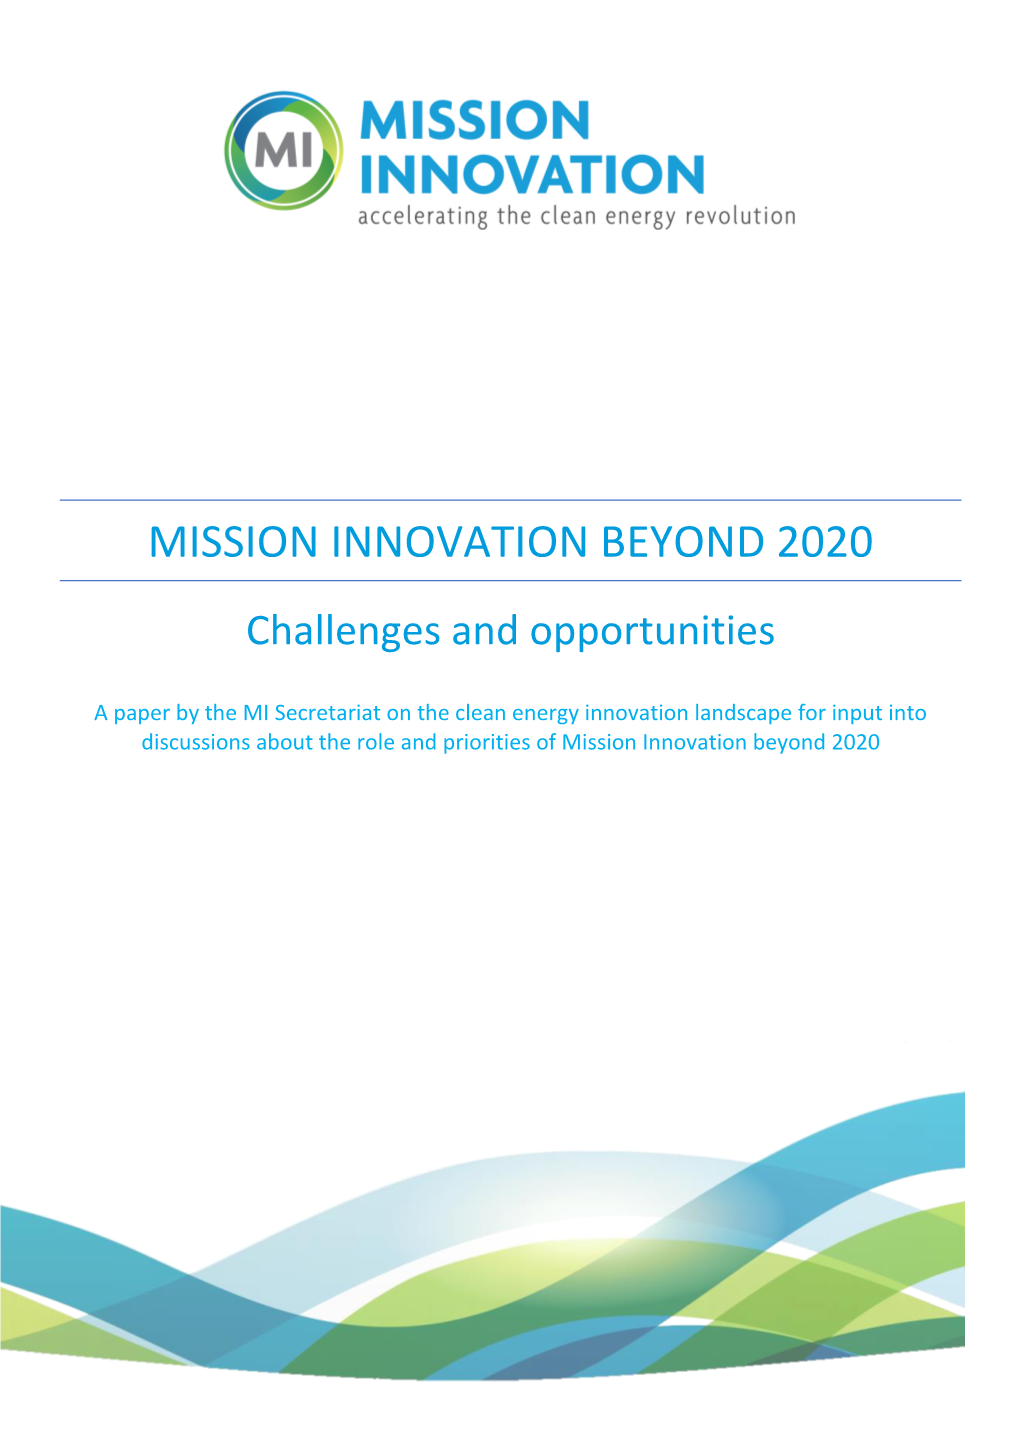 Mission Innovation Beyond 2020: Challenges and Opportunities